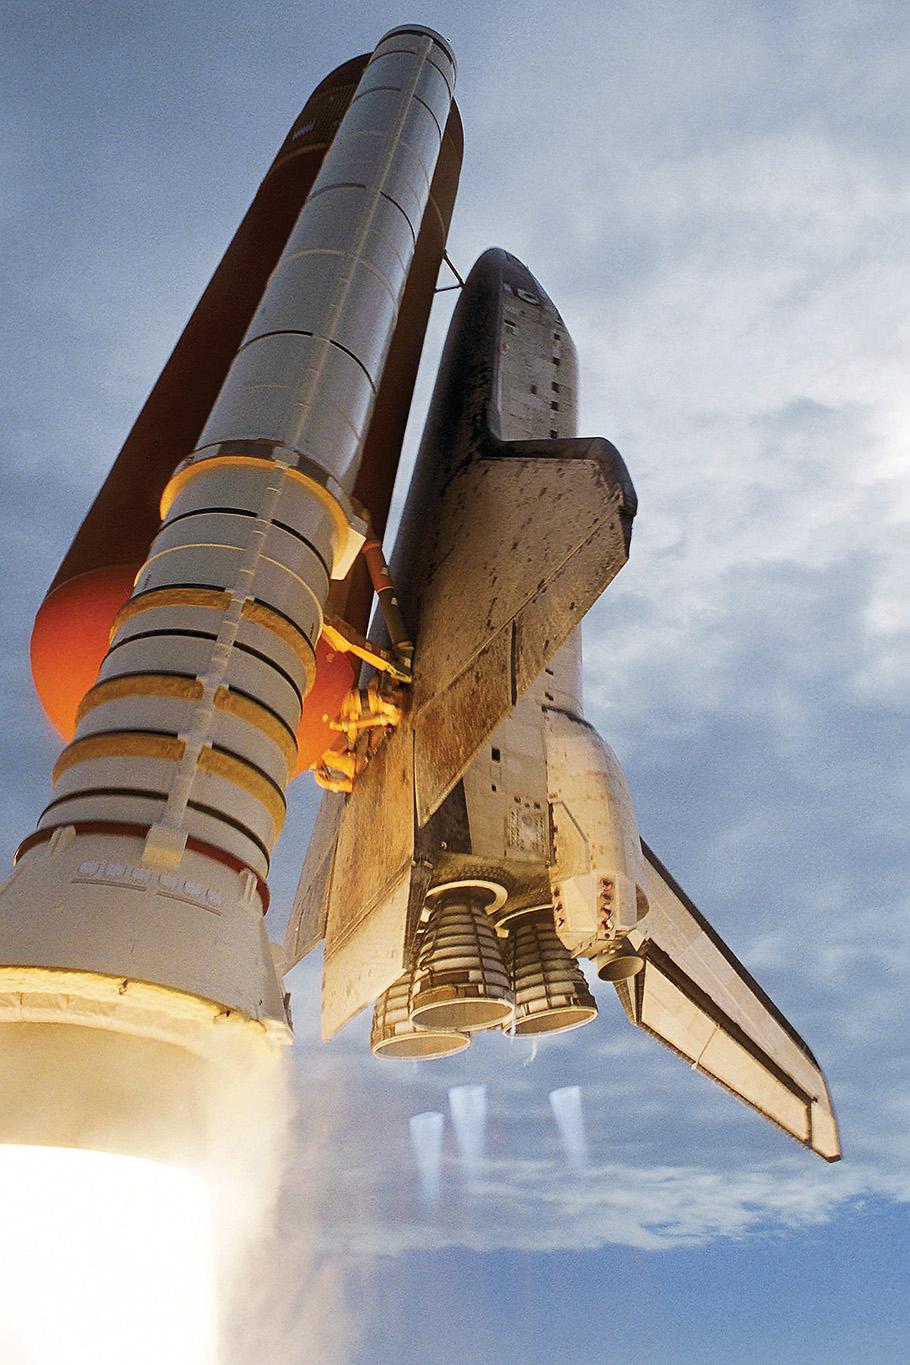 Space Shuttle Discovery and booster in mid launch